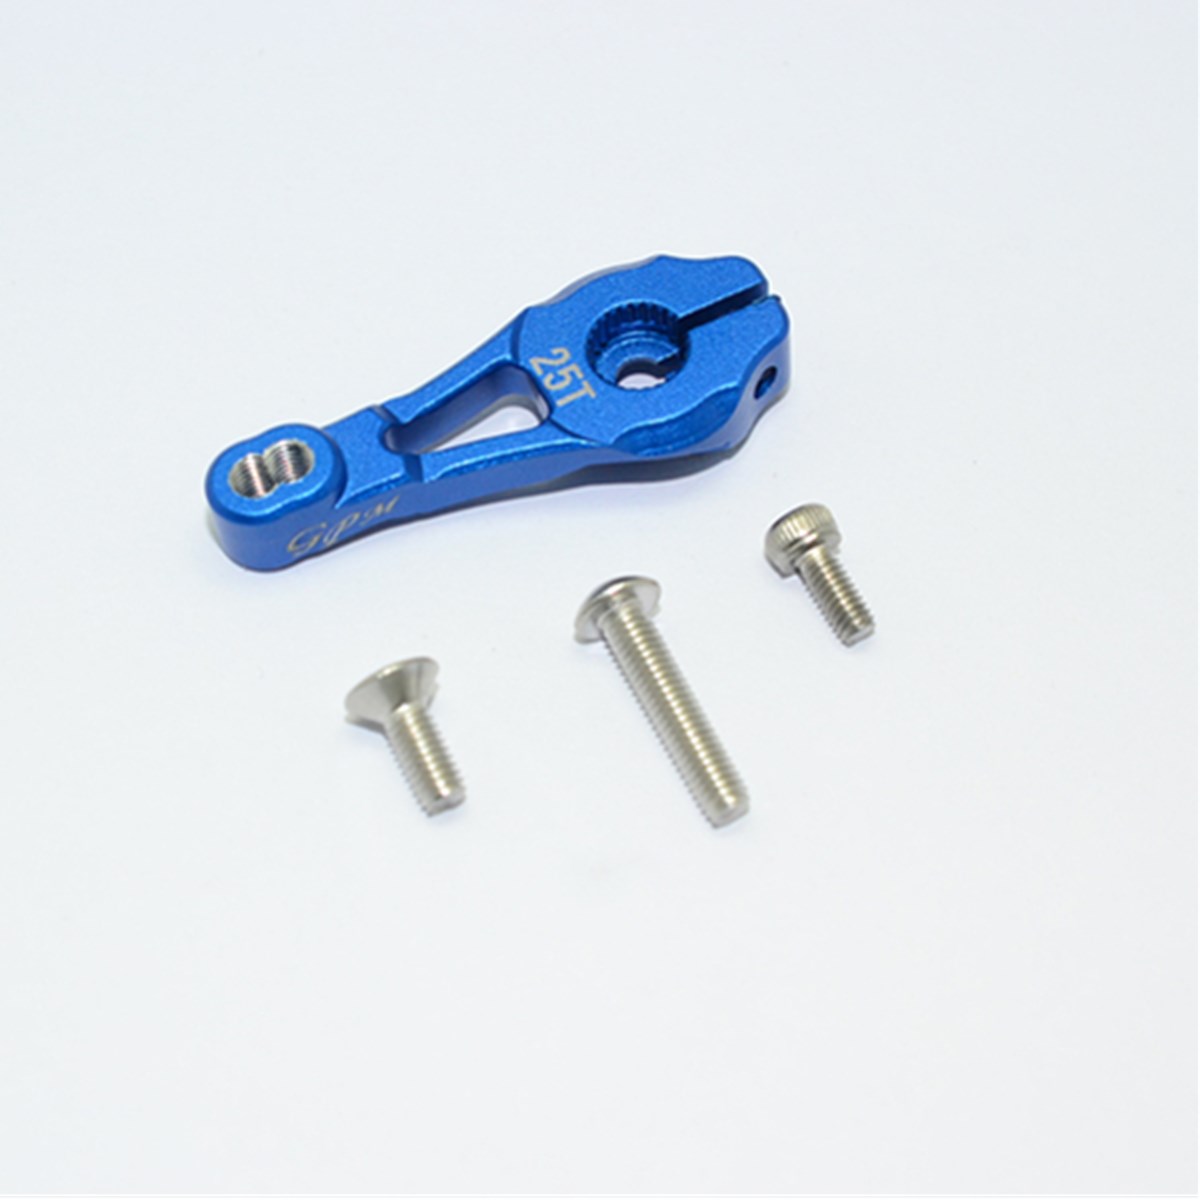 Aluminum-Alloy-Servo-Arm-With-Screws-Accessories-Suit-for-25T-Straight-Arm-Servo-1250410-3